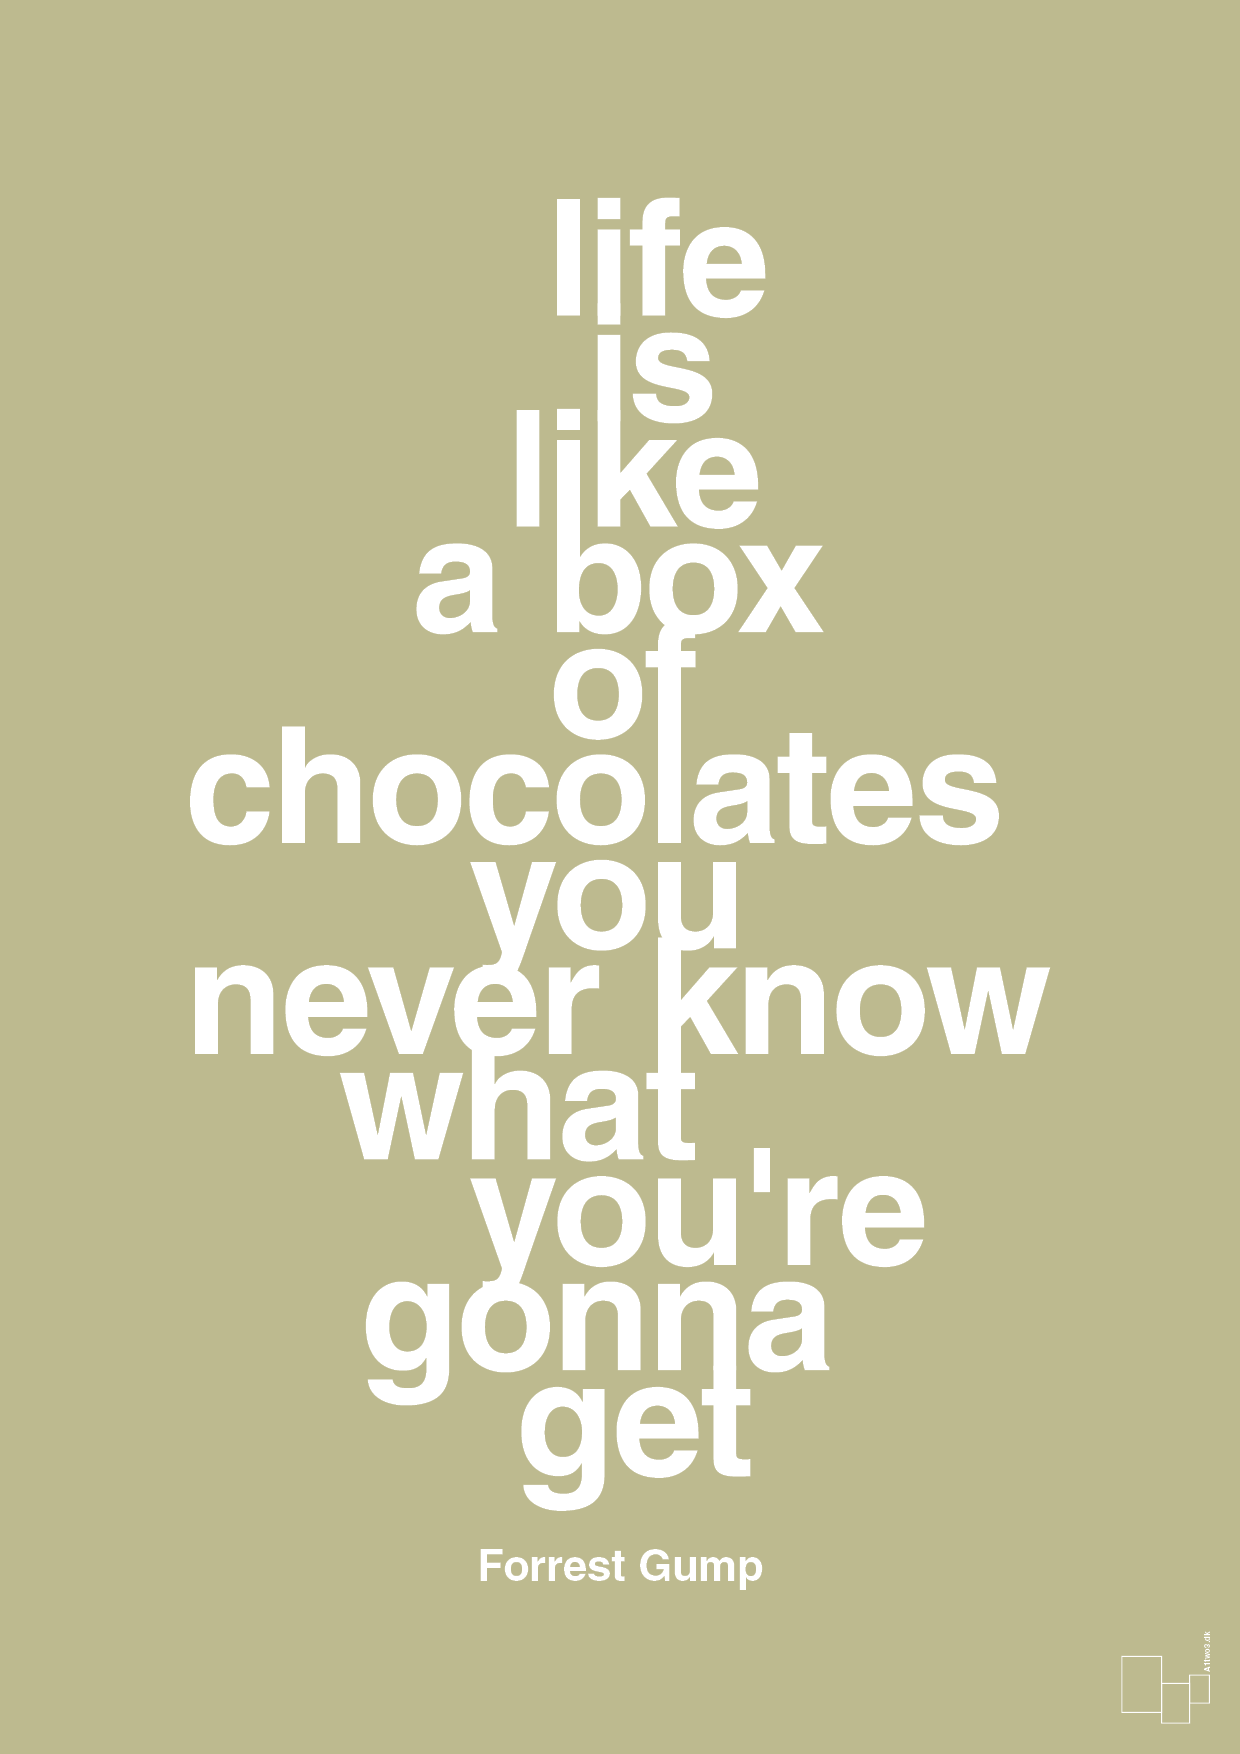 life is like a box of chocolates you never know what you're gonna get - Plakat med Citater i Back to Nature